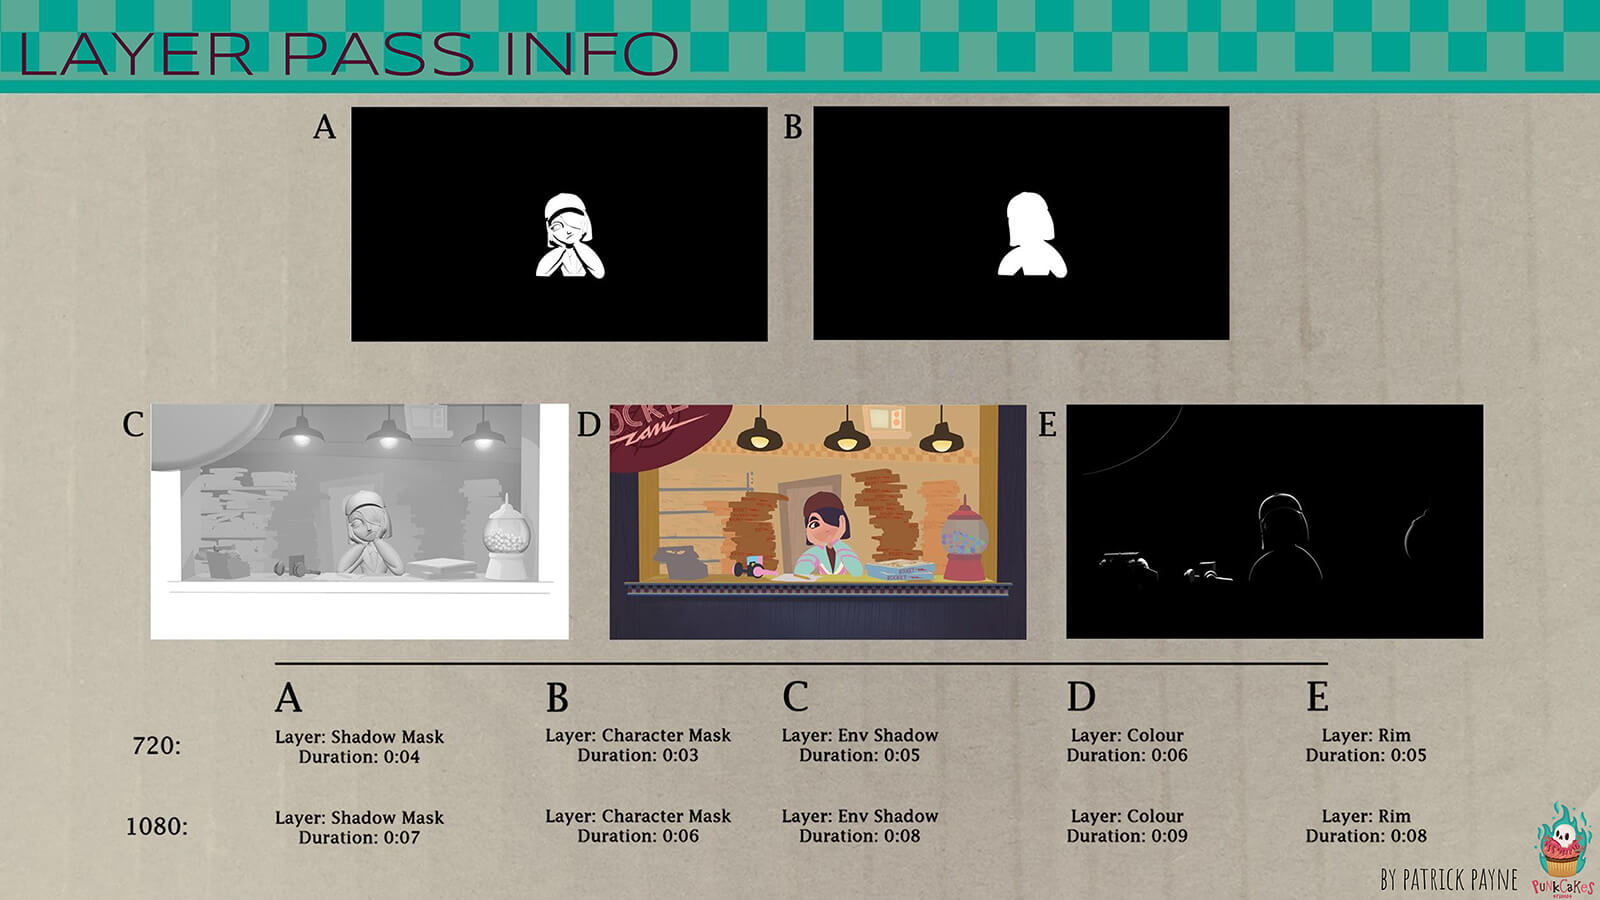 A "layer pass info" sheet, showing the variety of shadow, color, and light layers that wnet into a scene.